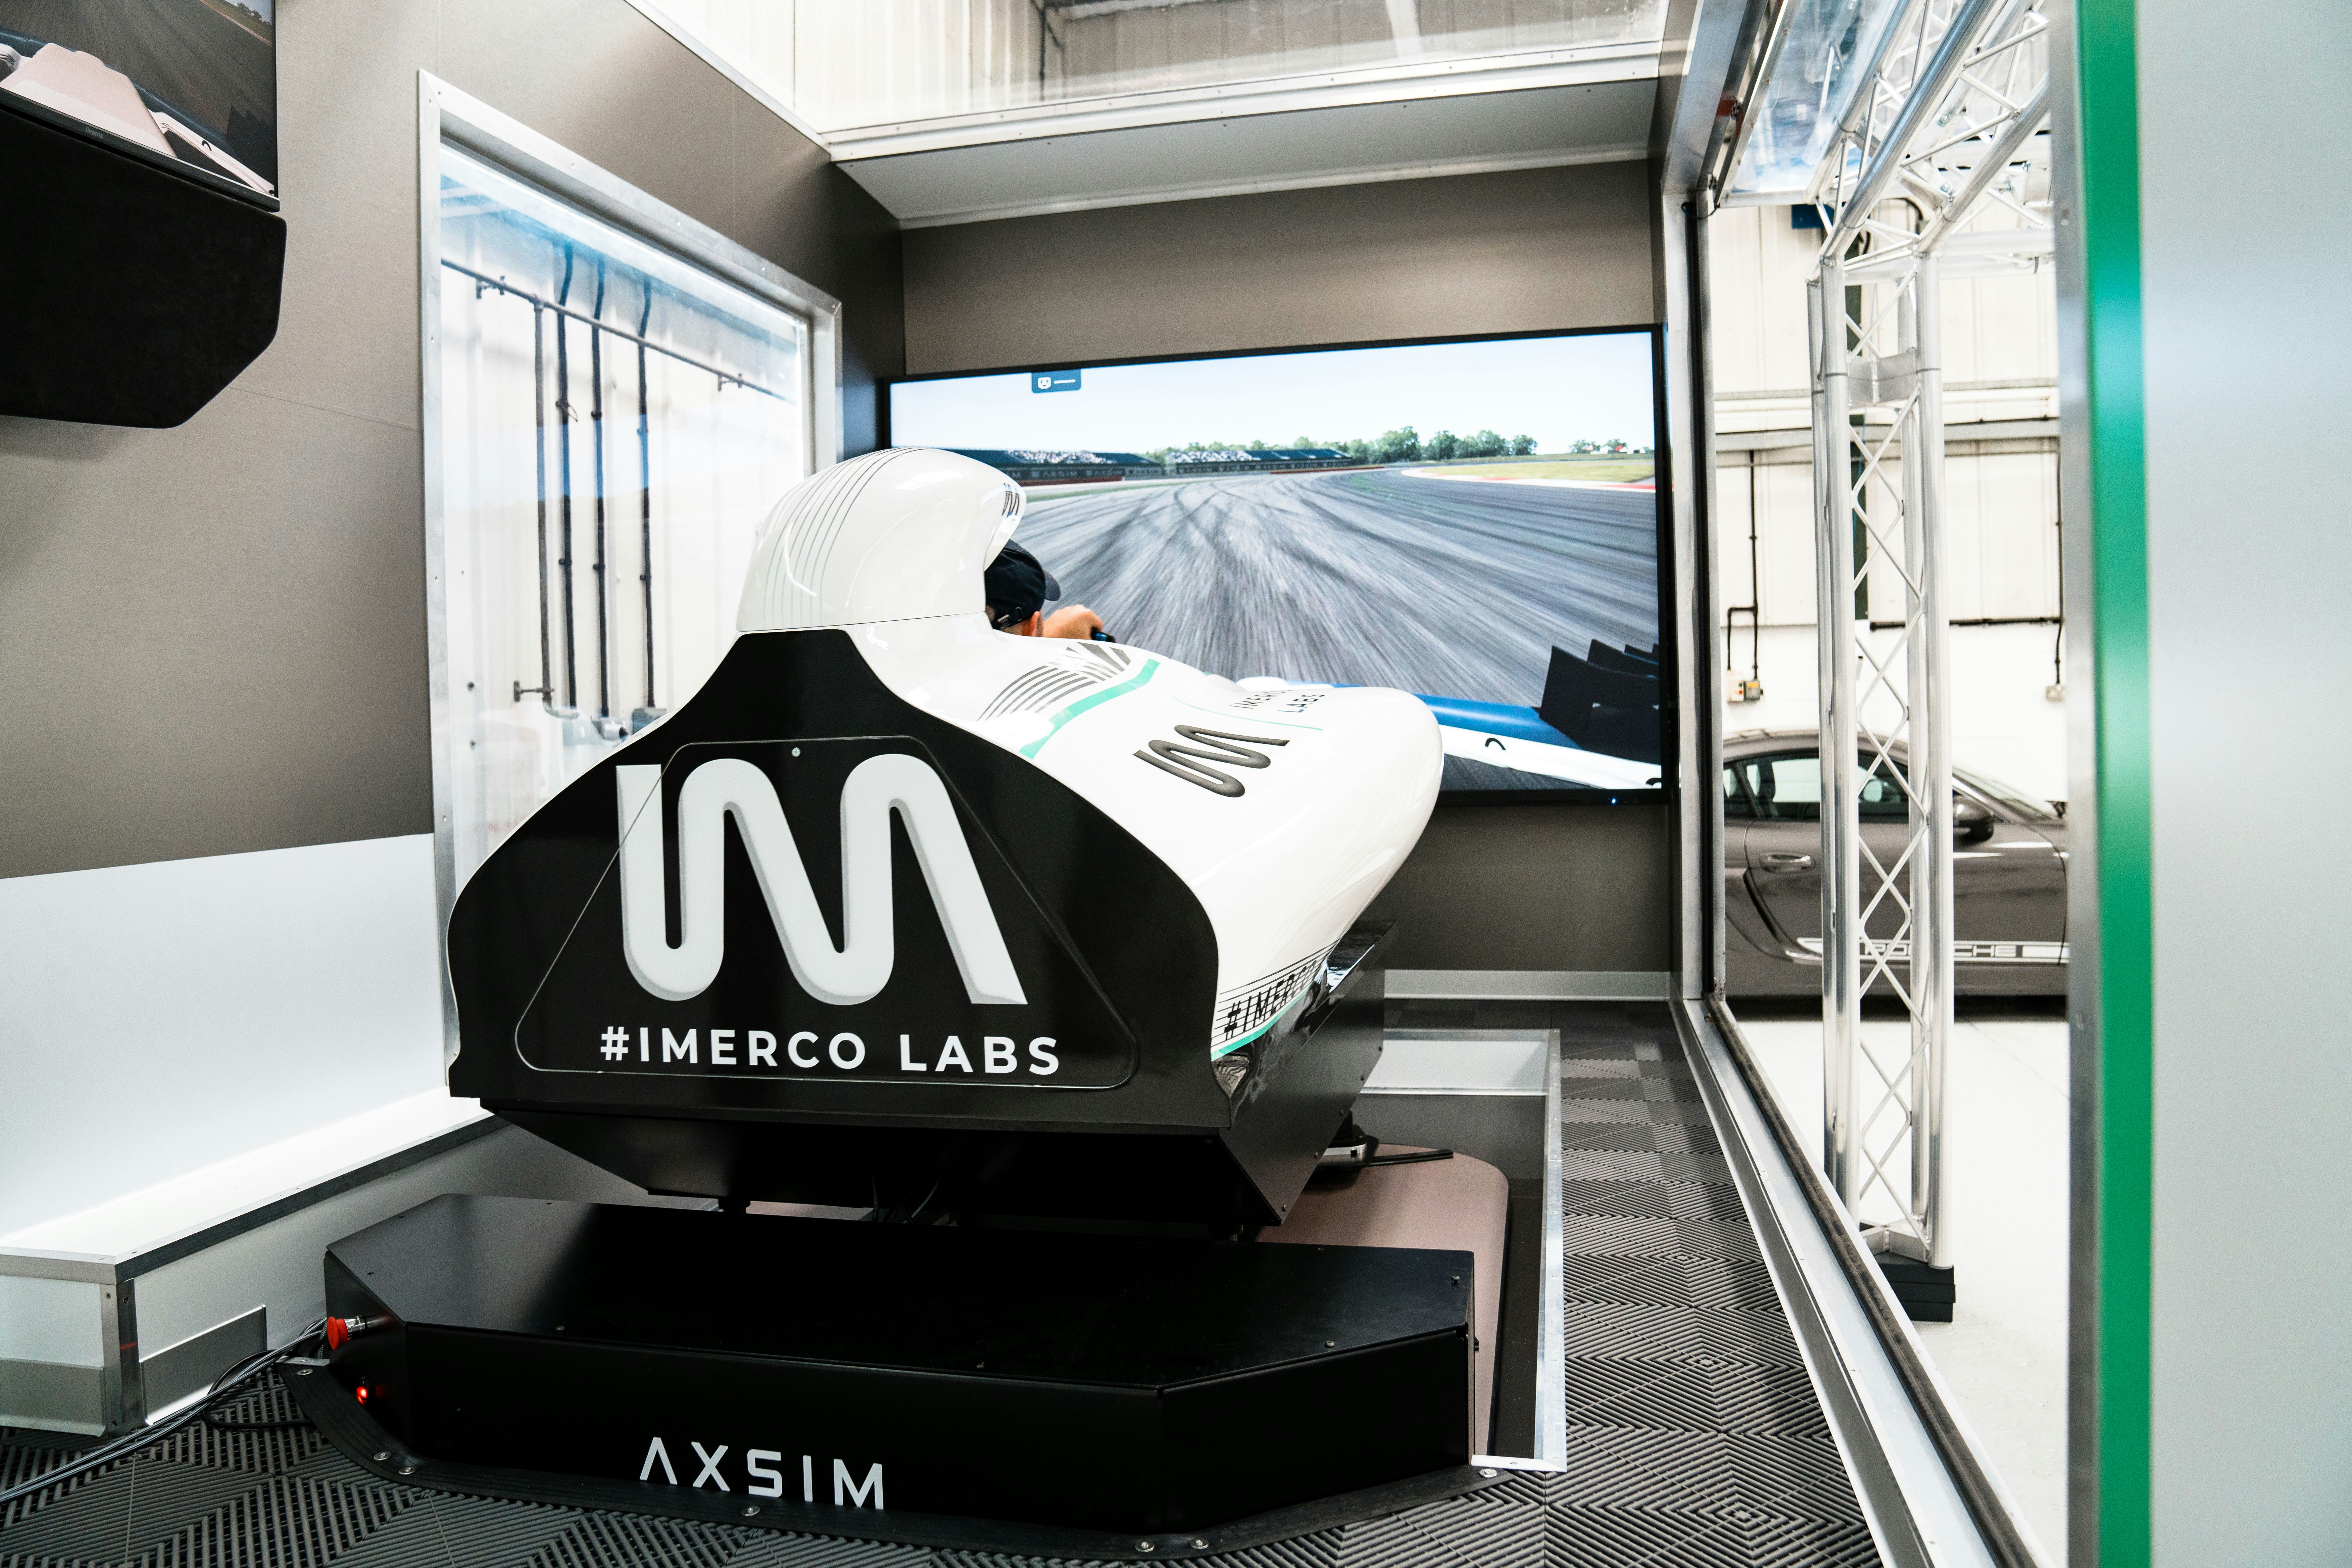 AXSIM FORMULA SIMULATOR for sale by auction in Reading, Berkshire, United  Kingdom